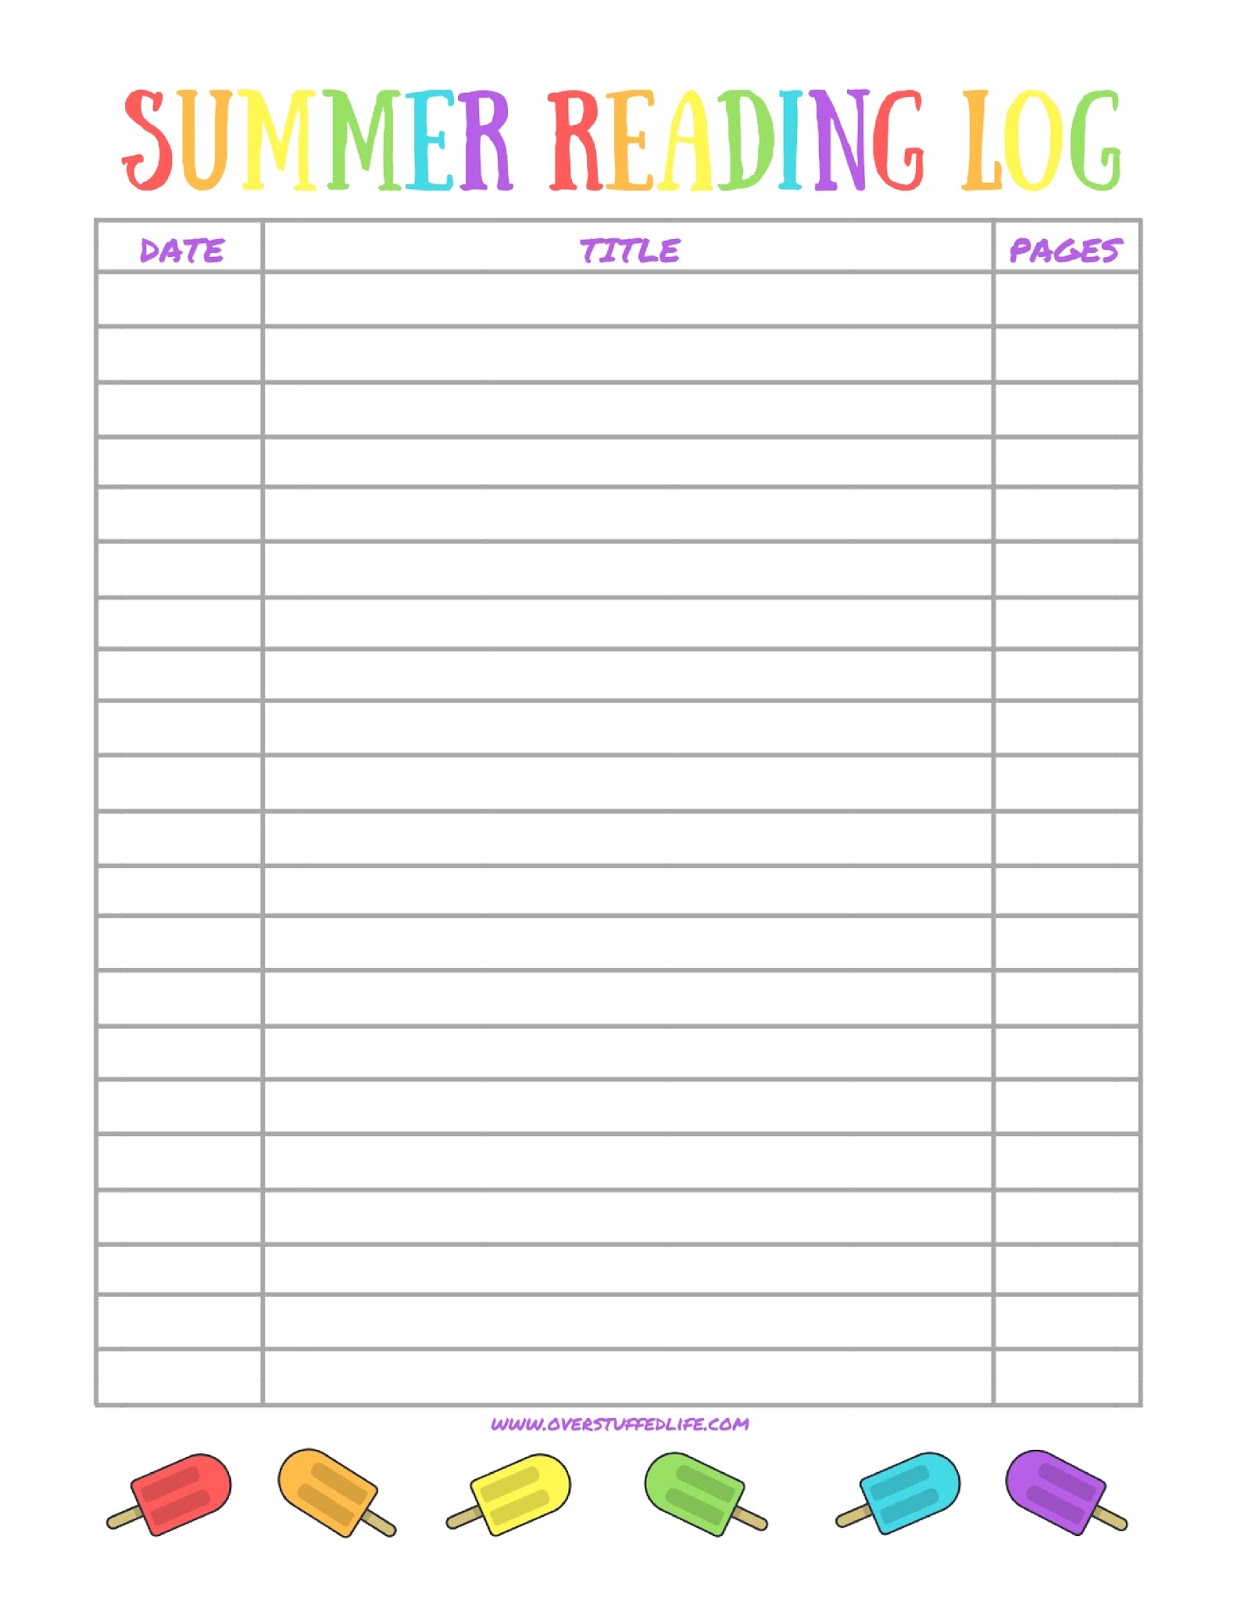 This free printable summer reading log will help your kids keep track of the books they read this summer.